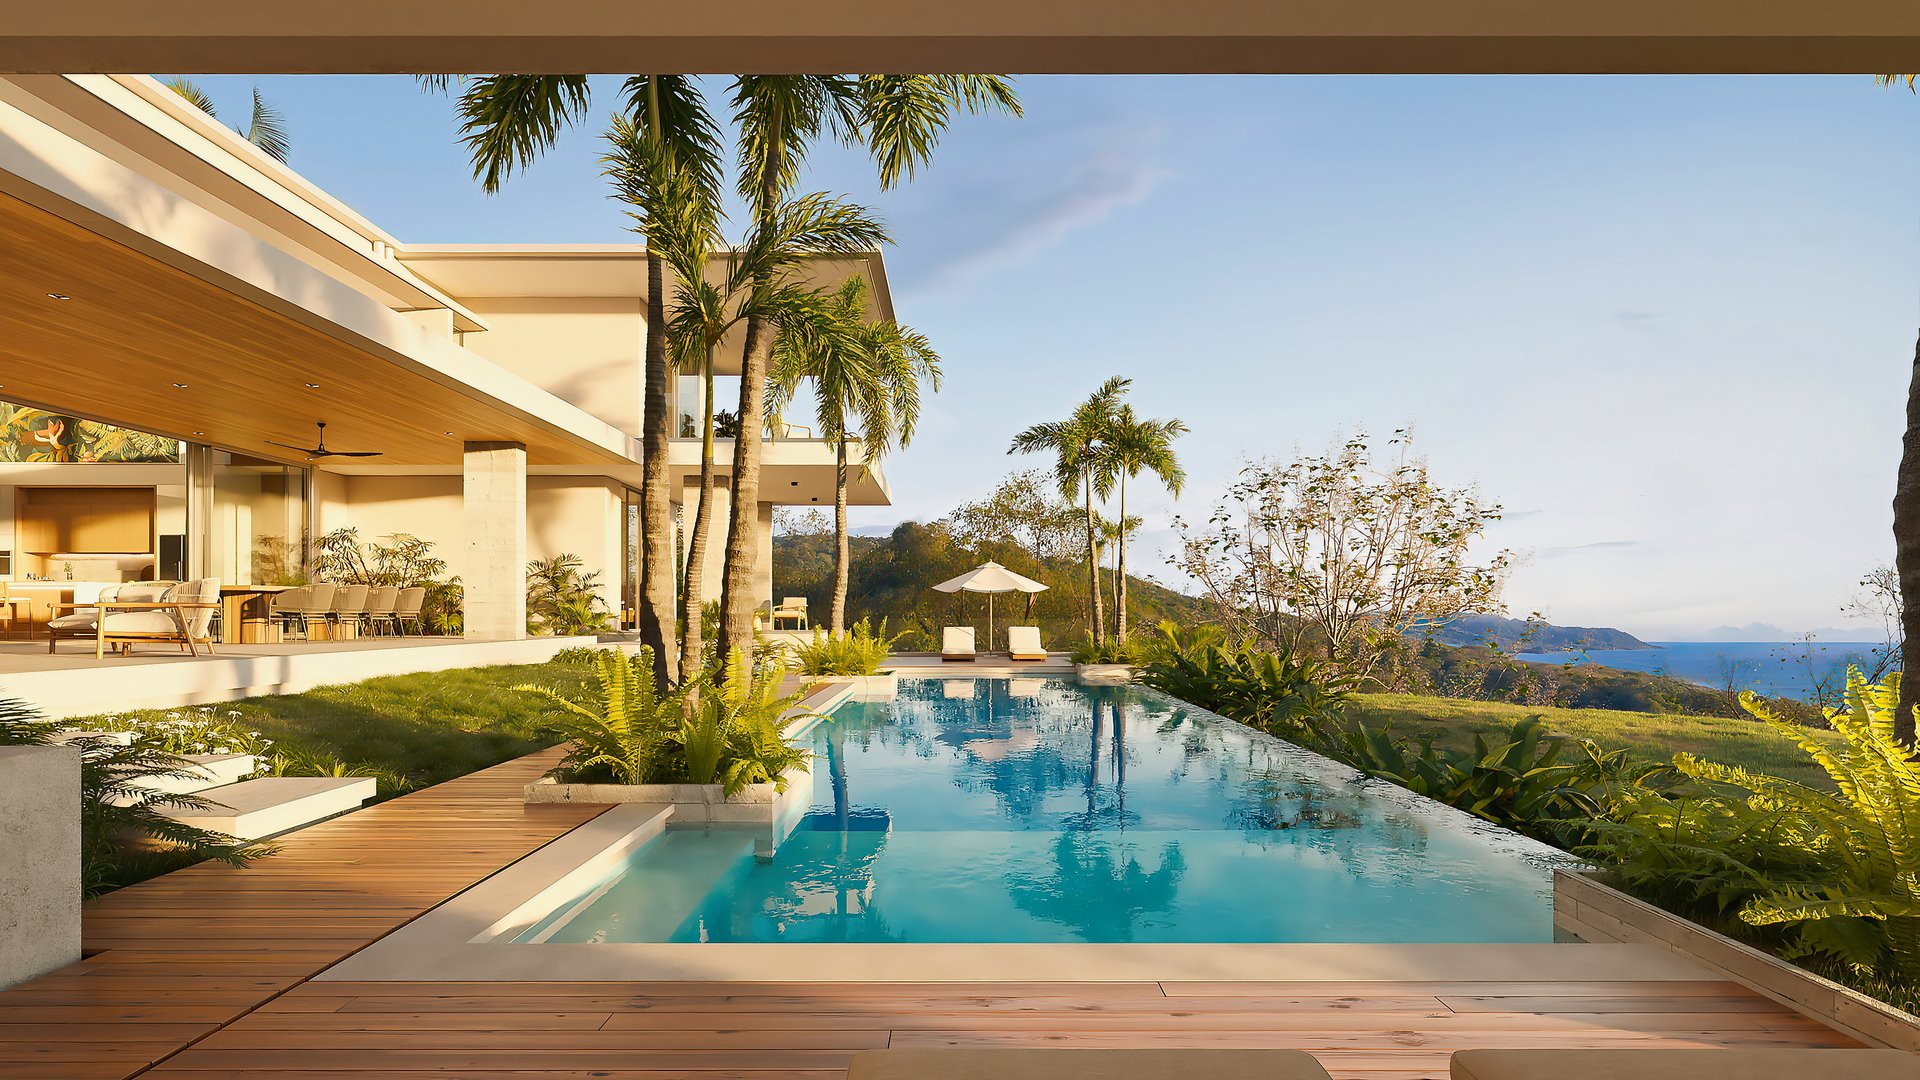 9204-Pool with ocean view from the villa t Flamingo in Costa Rica